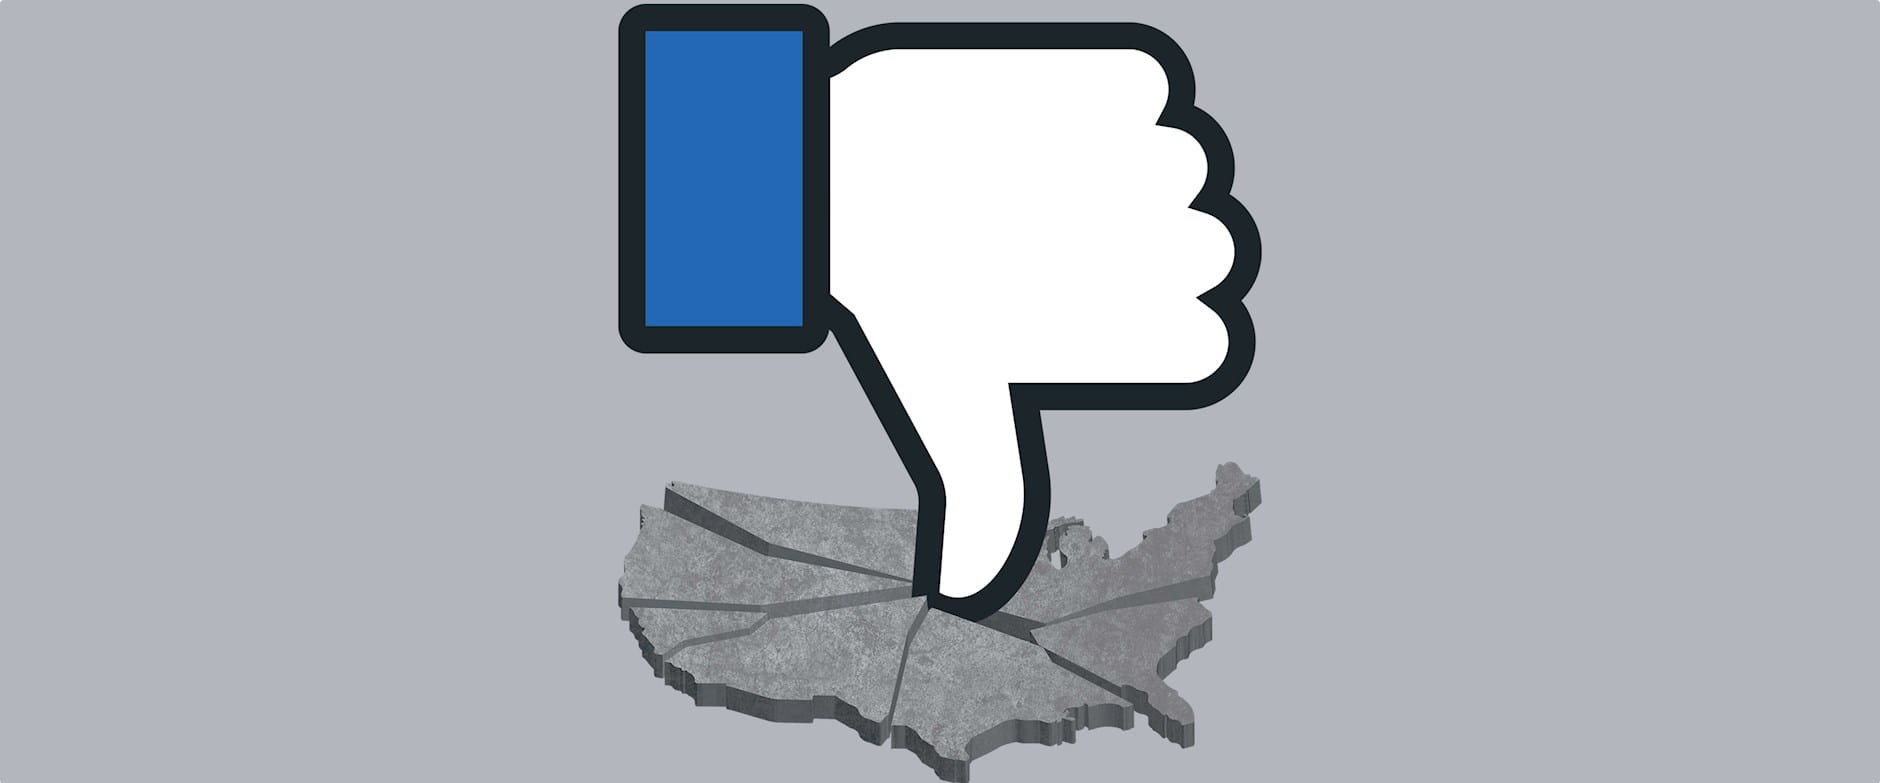 Facebook thumbs down symbol over a map of the United States